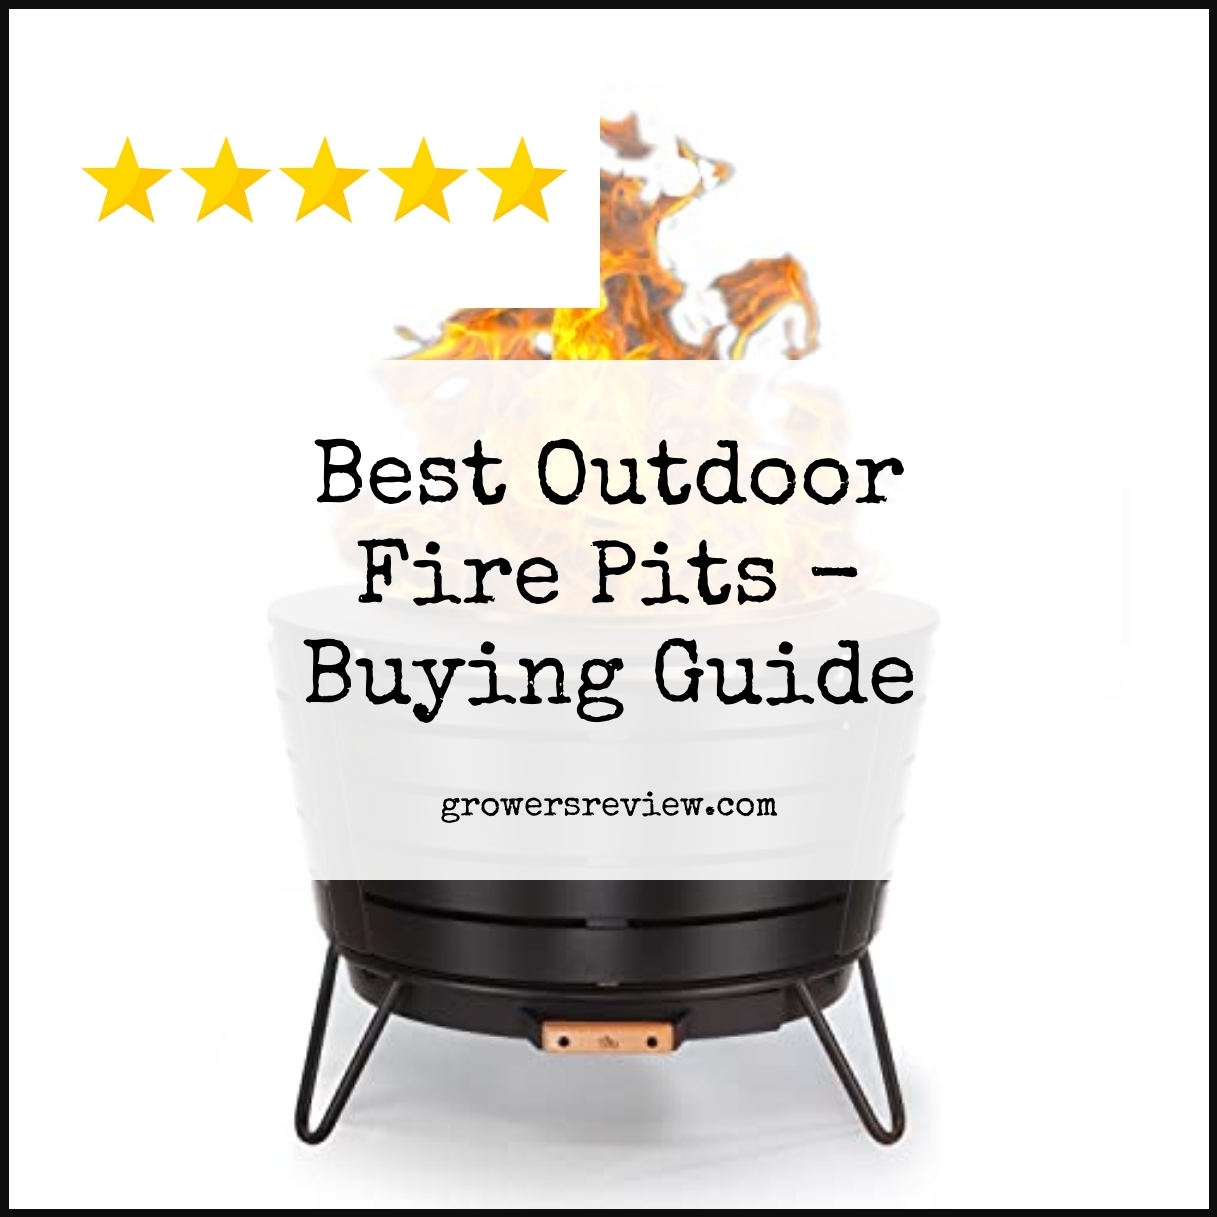 Best Outdoor Fire Pits - Buying Guide